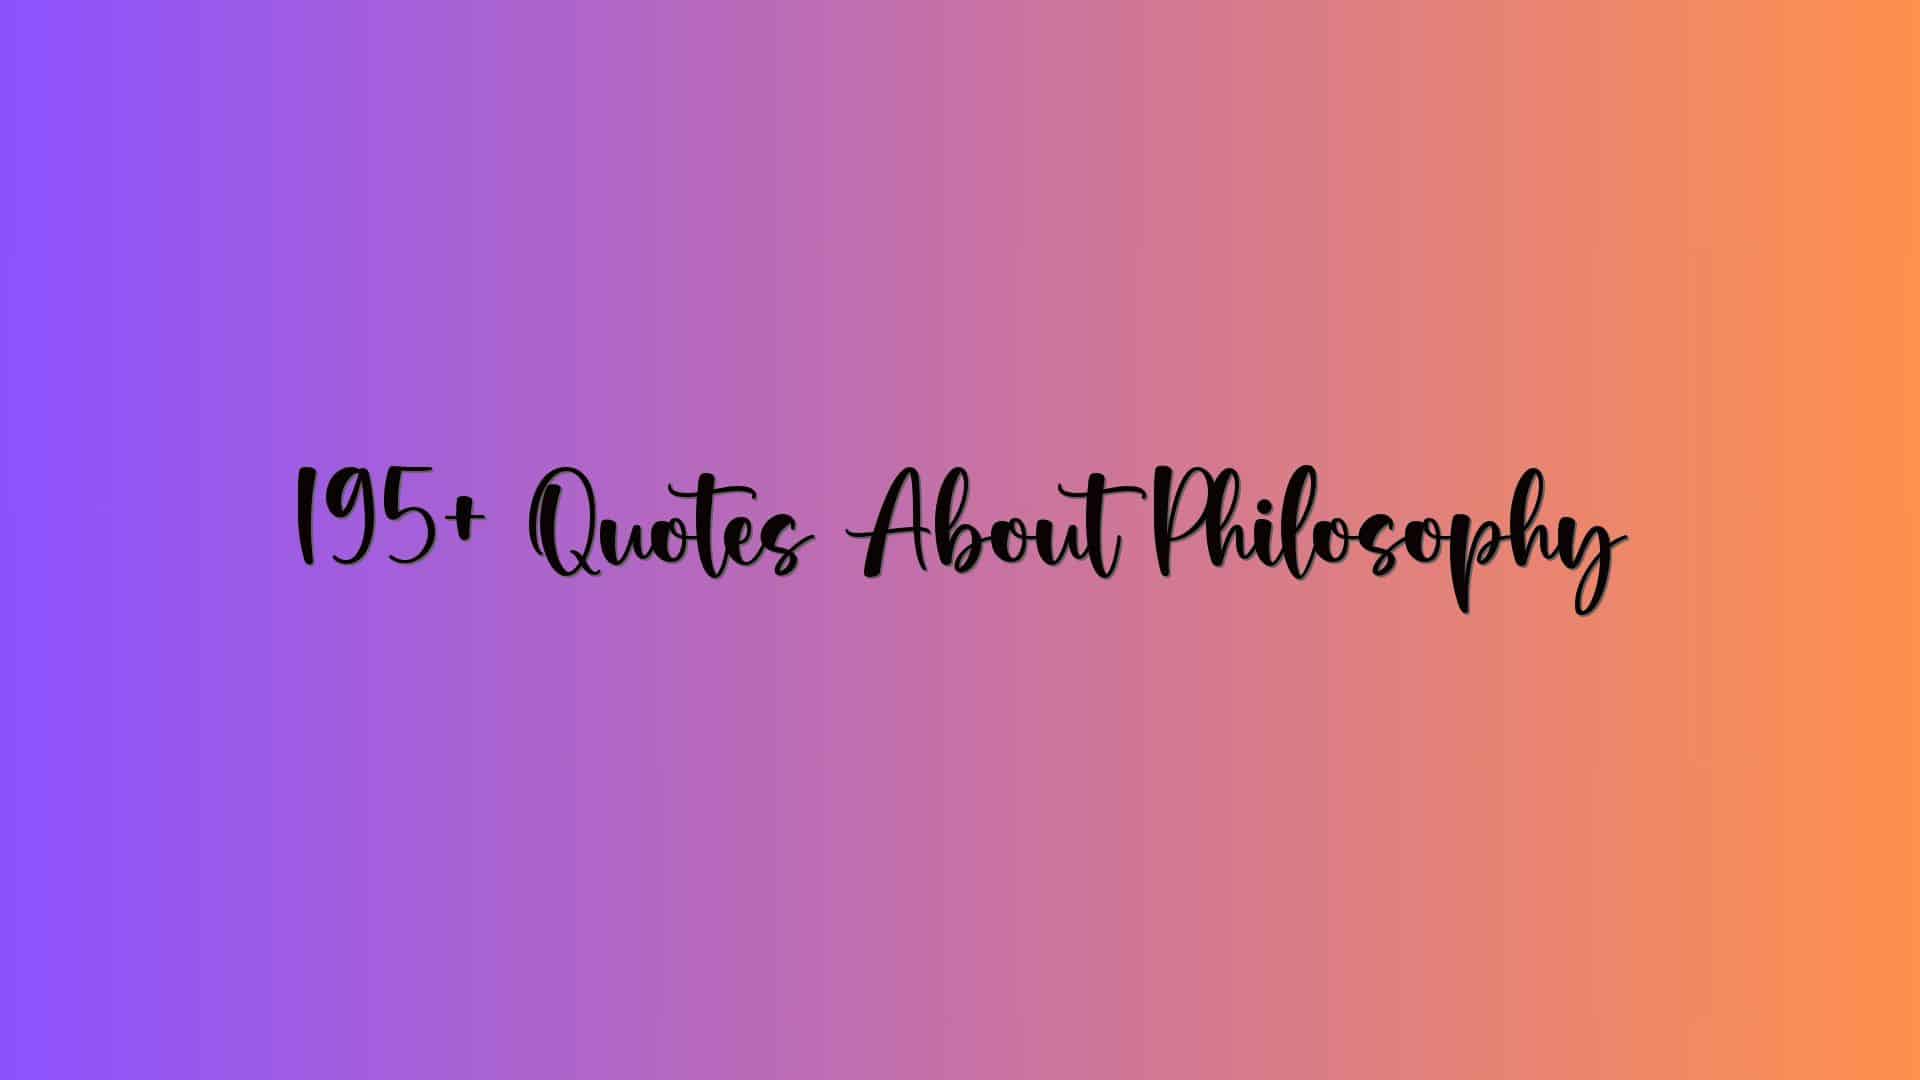 195+ Quotes About Philosophy